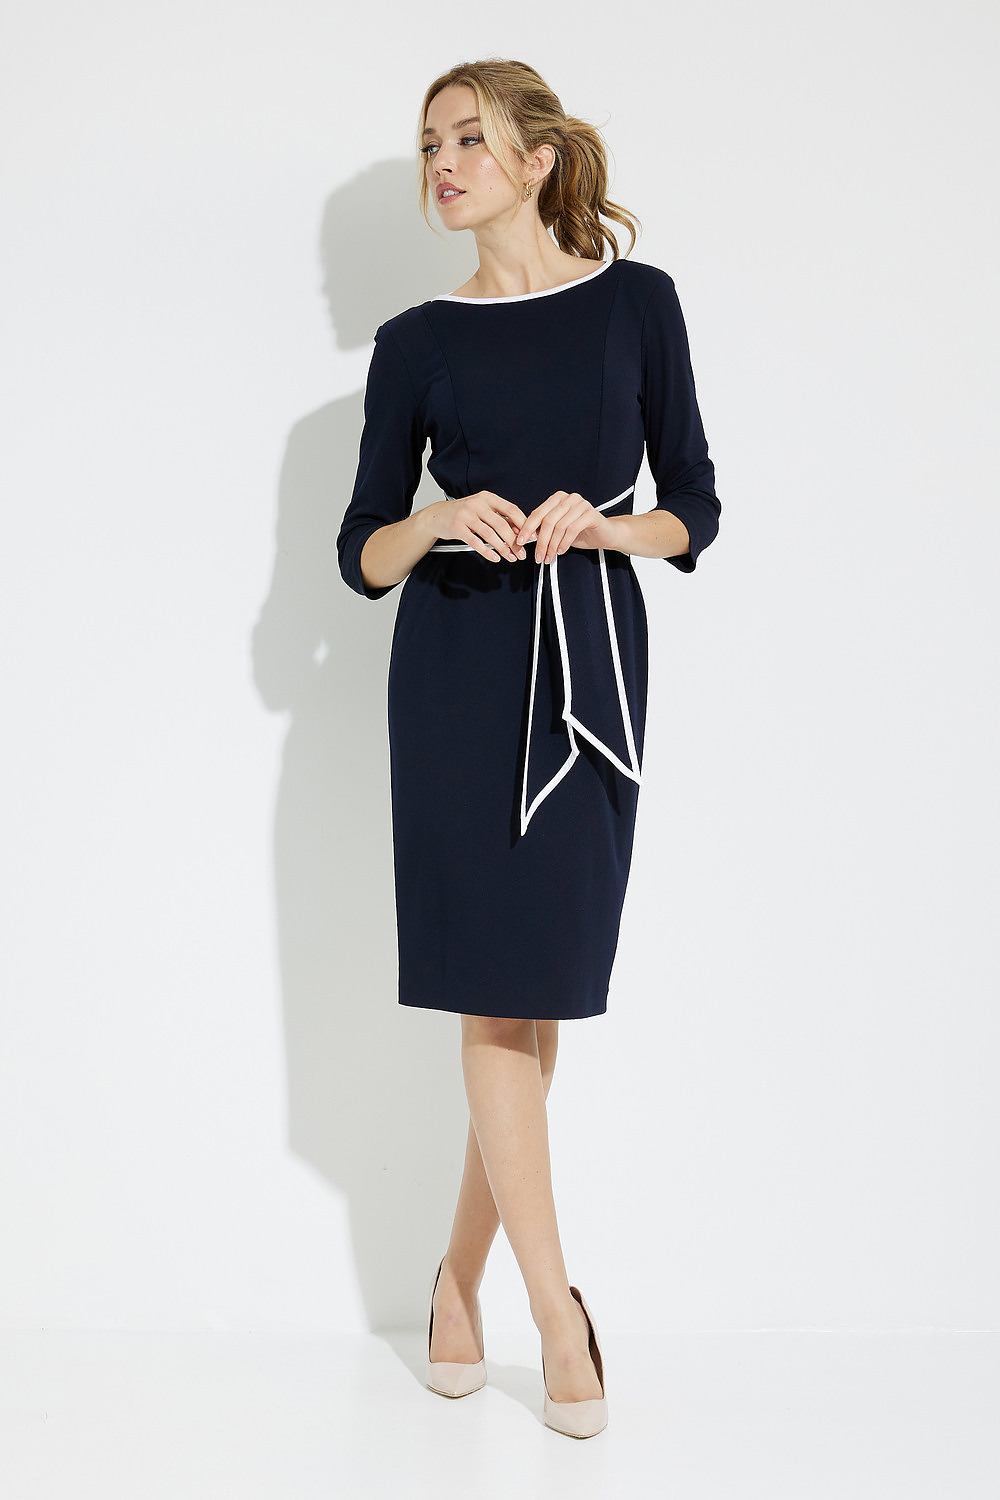 Contrast Trim Dress Style 221210. Midnight Blue/off White